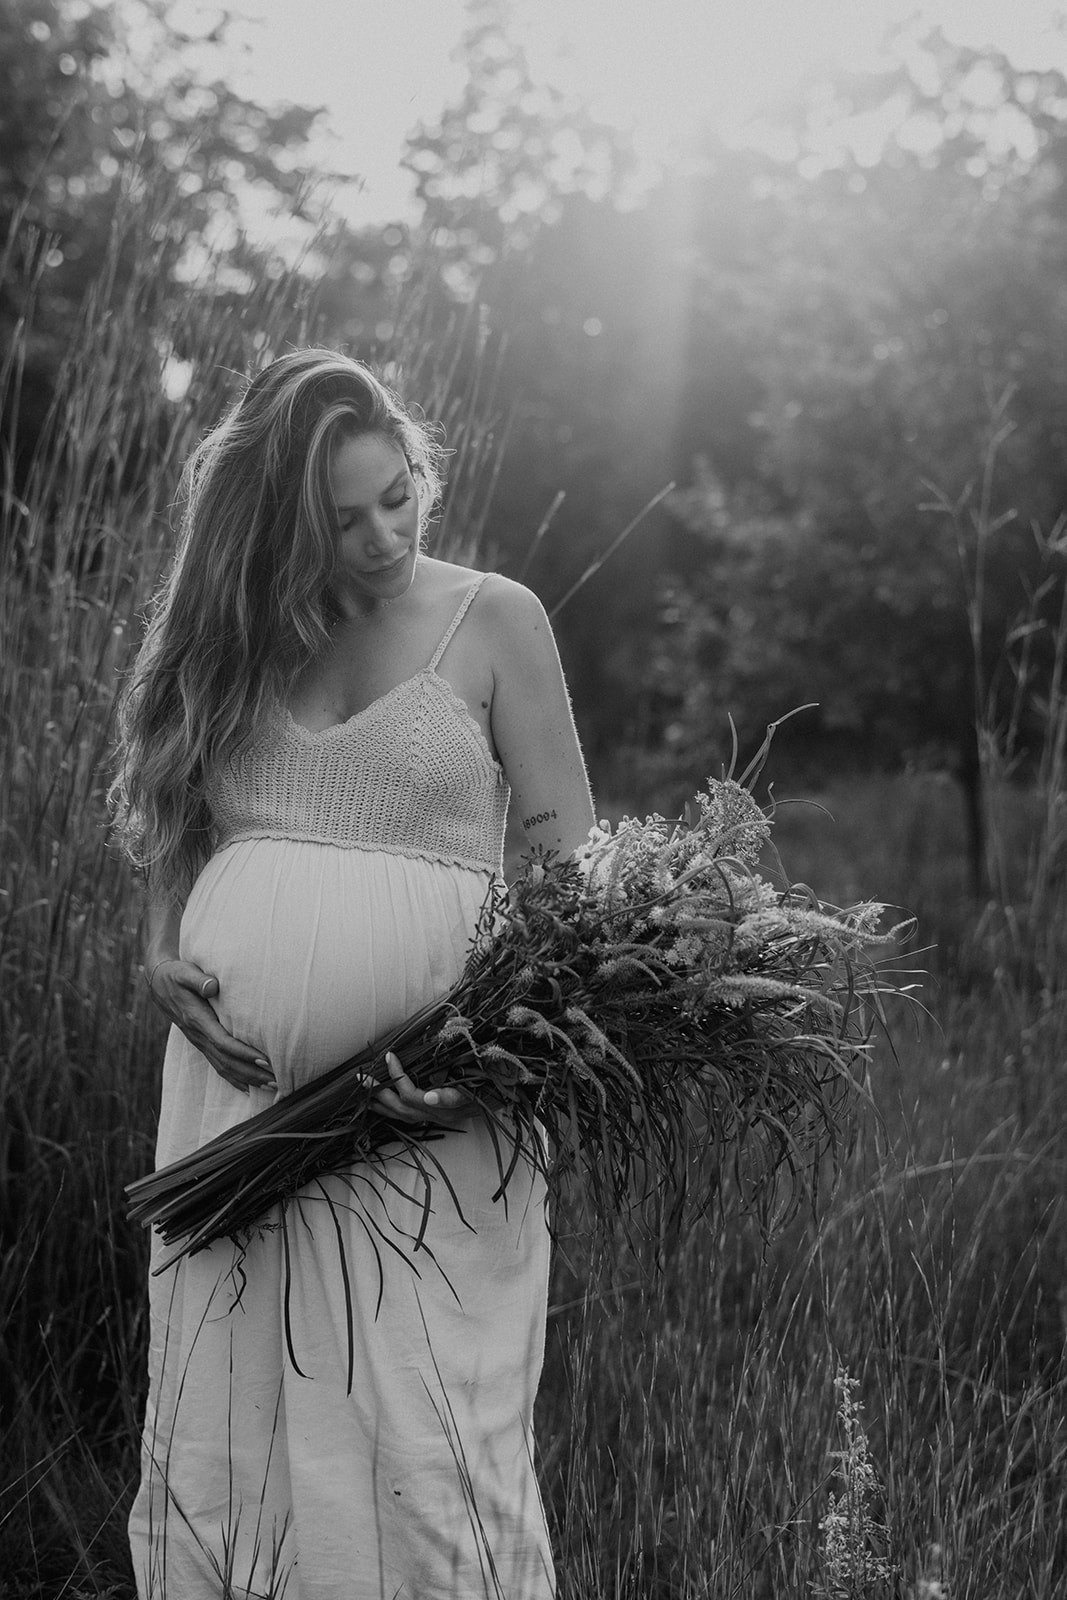 Black and white pregnancy portrait taken at sunset by a maternity photographer